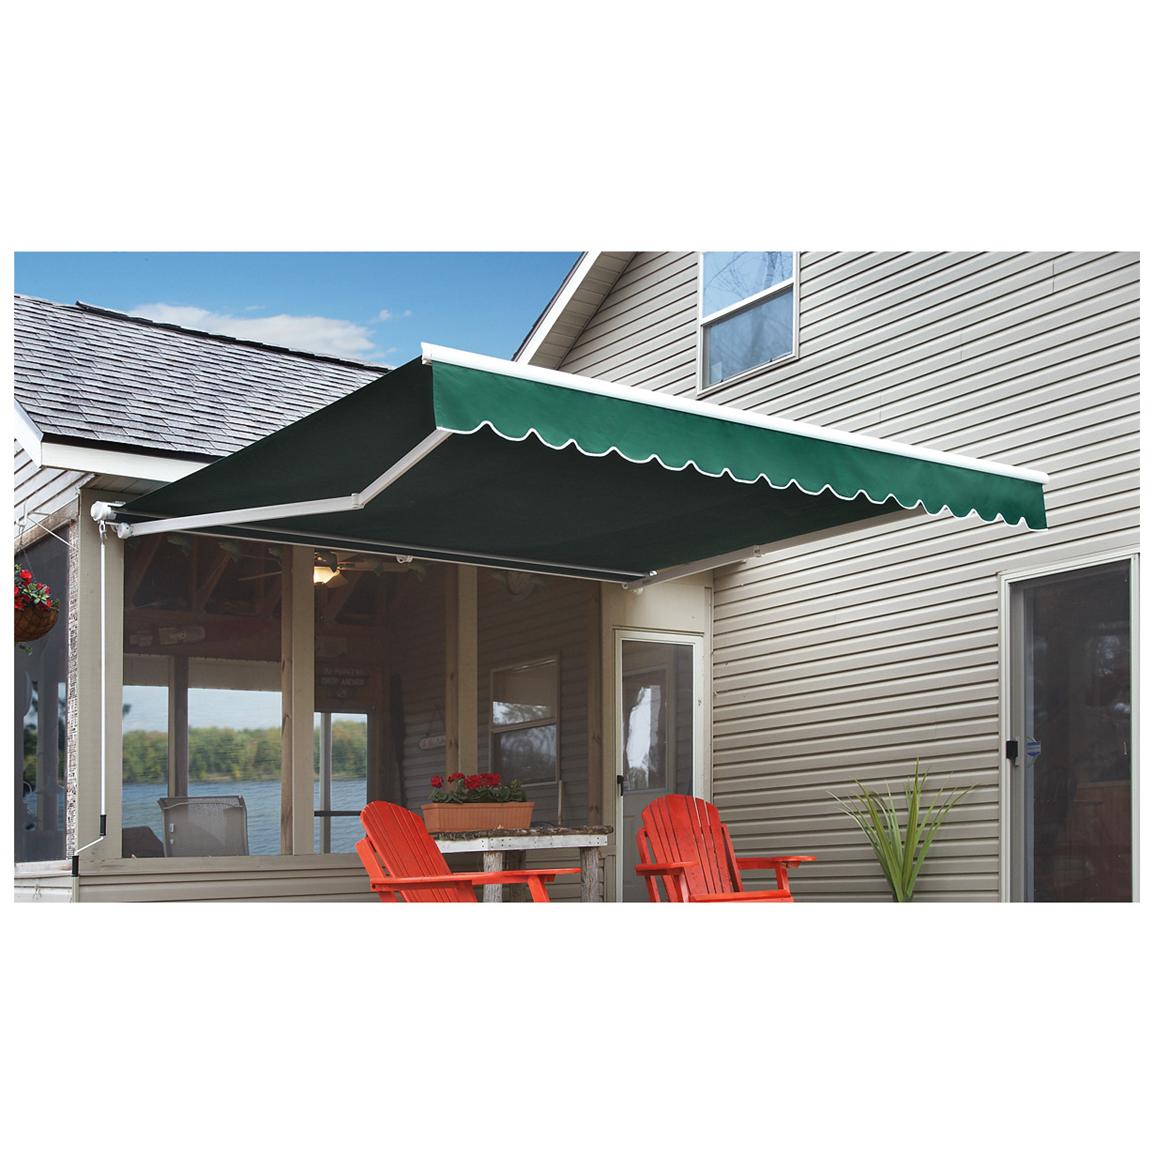 CASTLECREEK Retractable Awning  234396, Awnings \u0026 Shades at Sportsman\u002639;s Guide